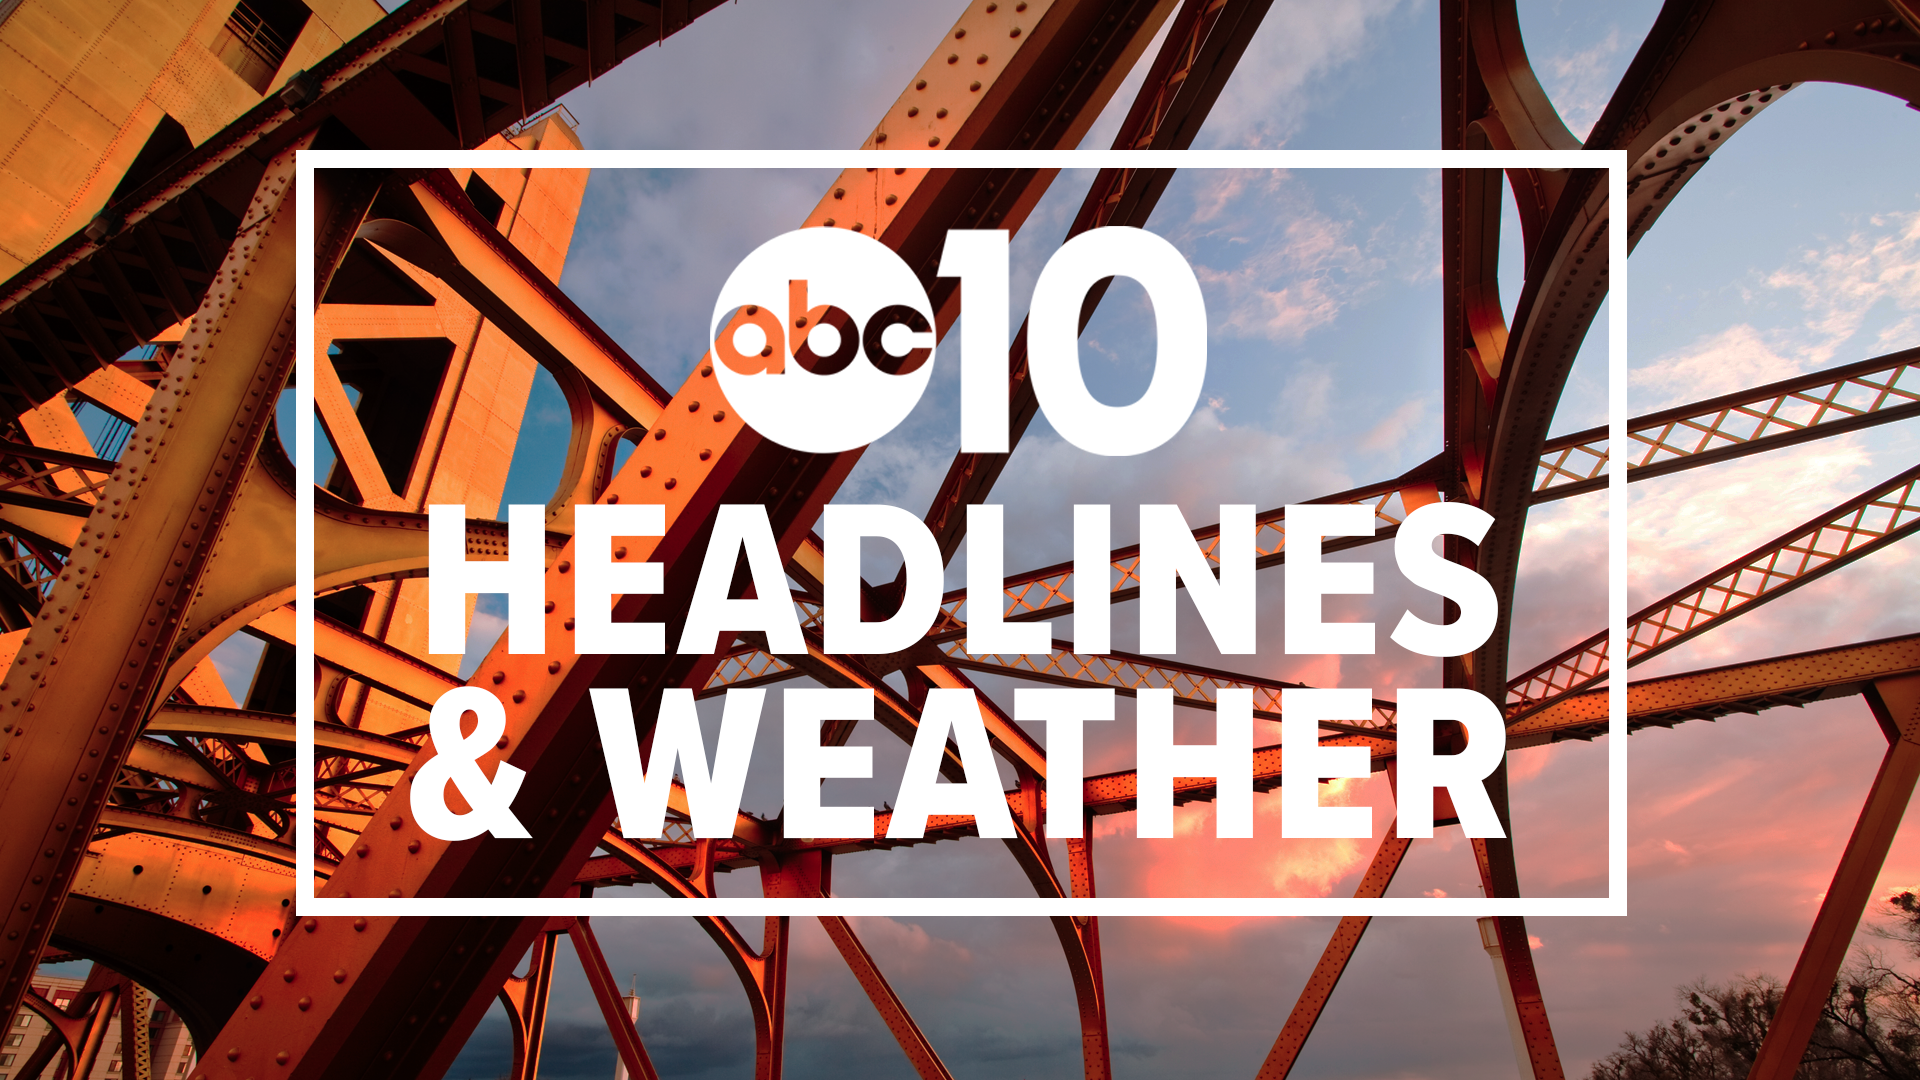 Evening Headlines: March 14, 2020 | Catch in-depth reporting on #LateNewsTonight at 11 p.m. | The latest Sacramento news is always at www.abc10.com.